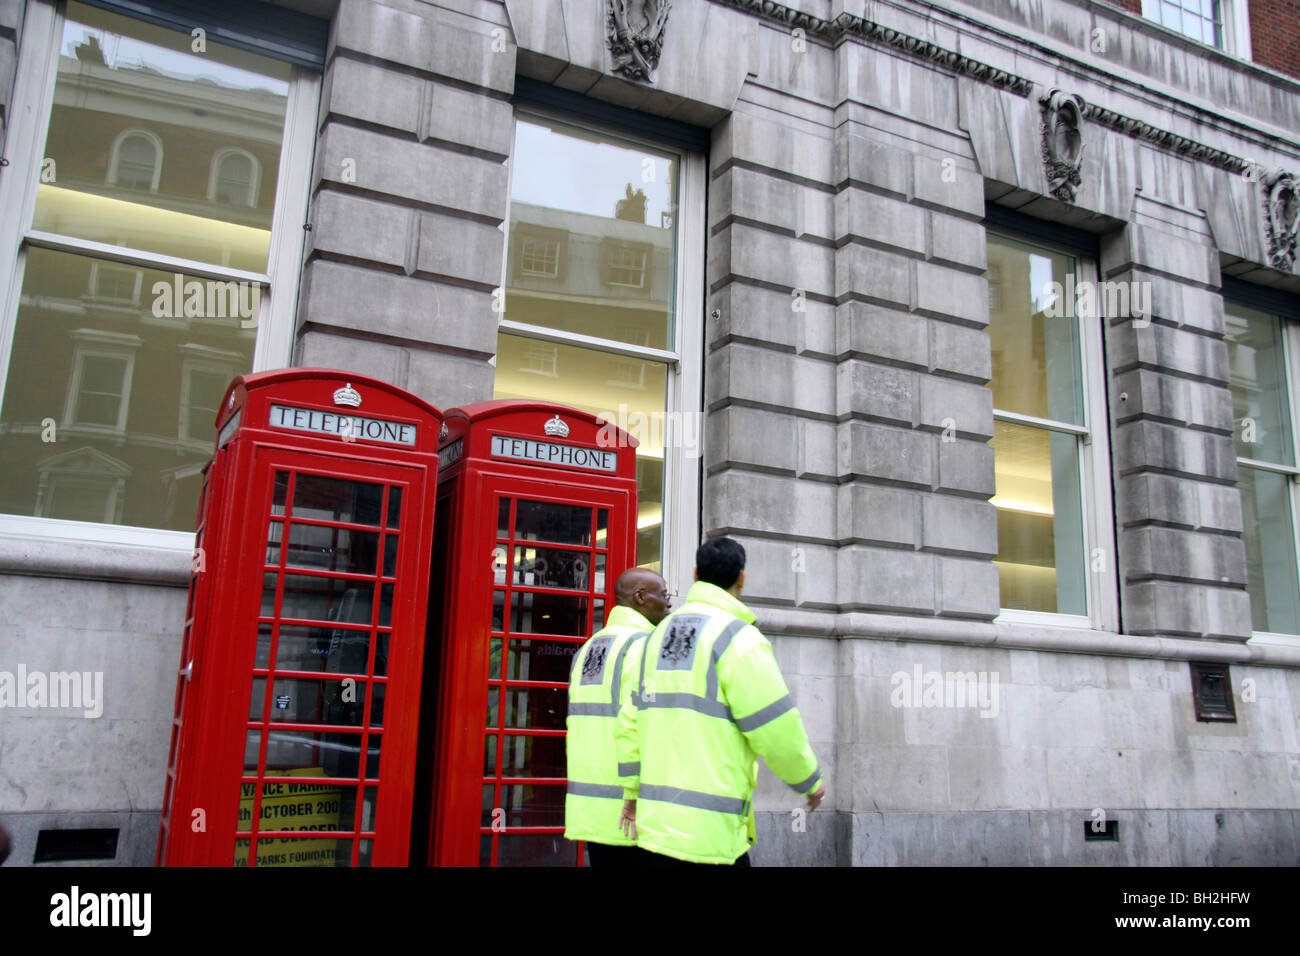 Two workers walking past telephone boxes near Whitehall in London Stock Photo